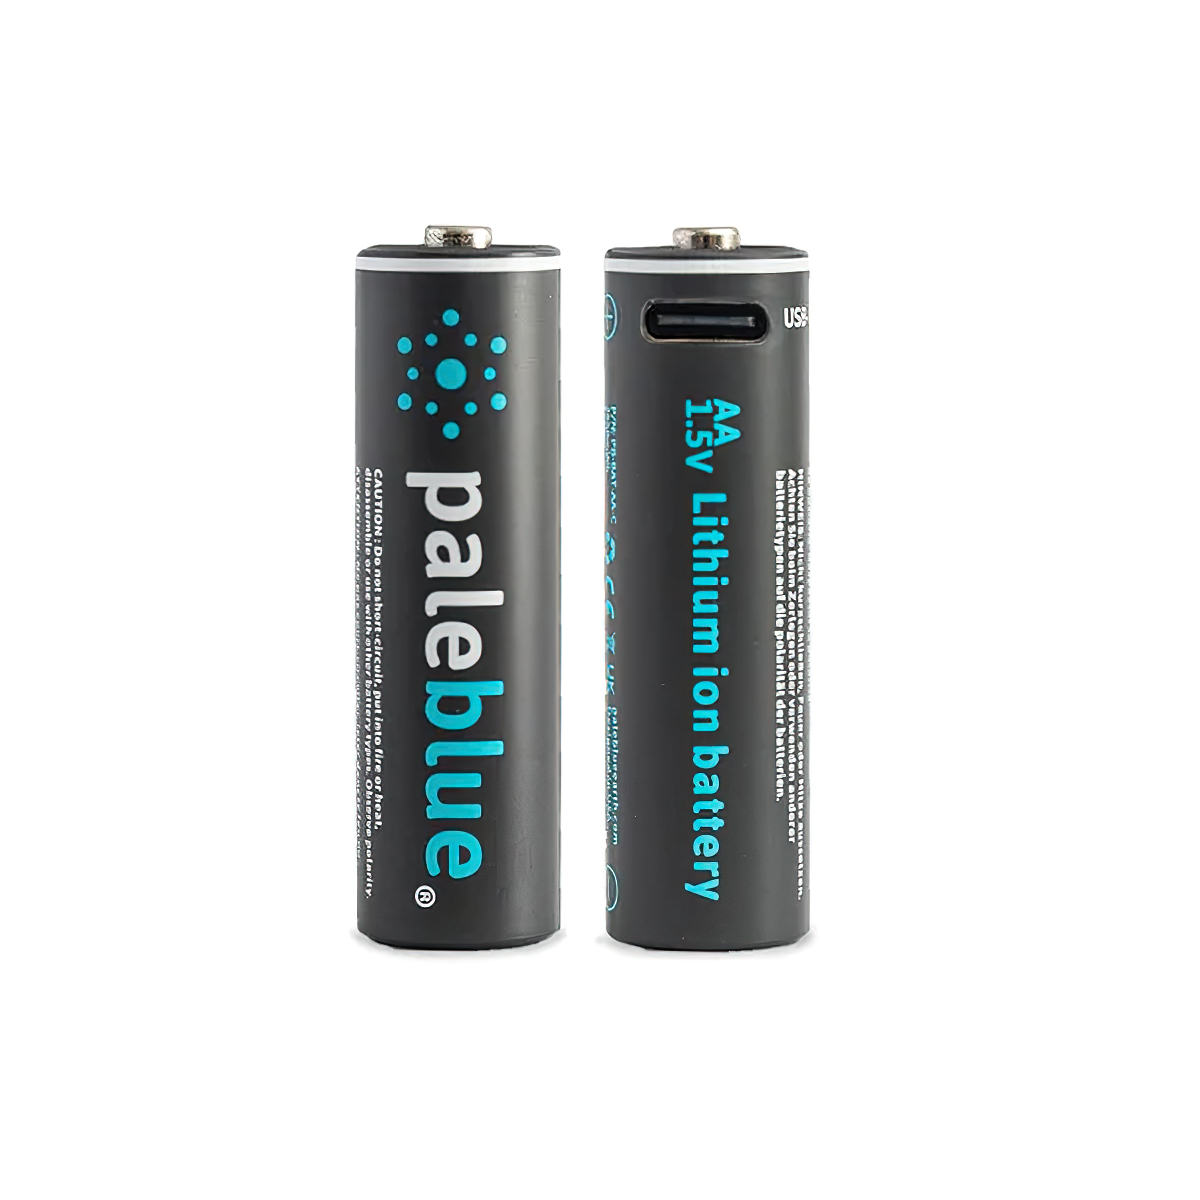 Pile rechargeable PALE BLUE USB AAA (LR03)